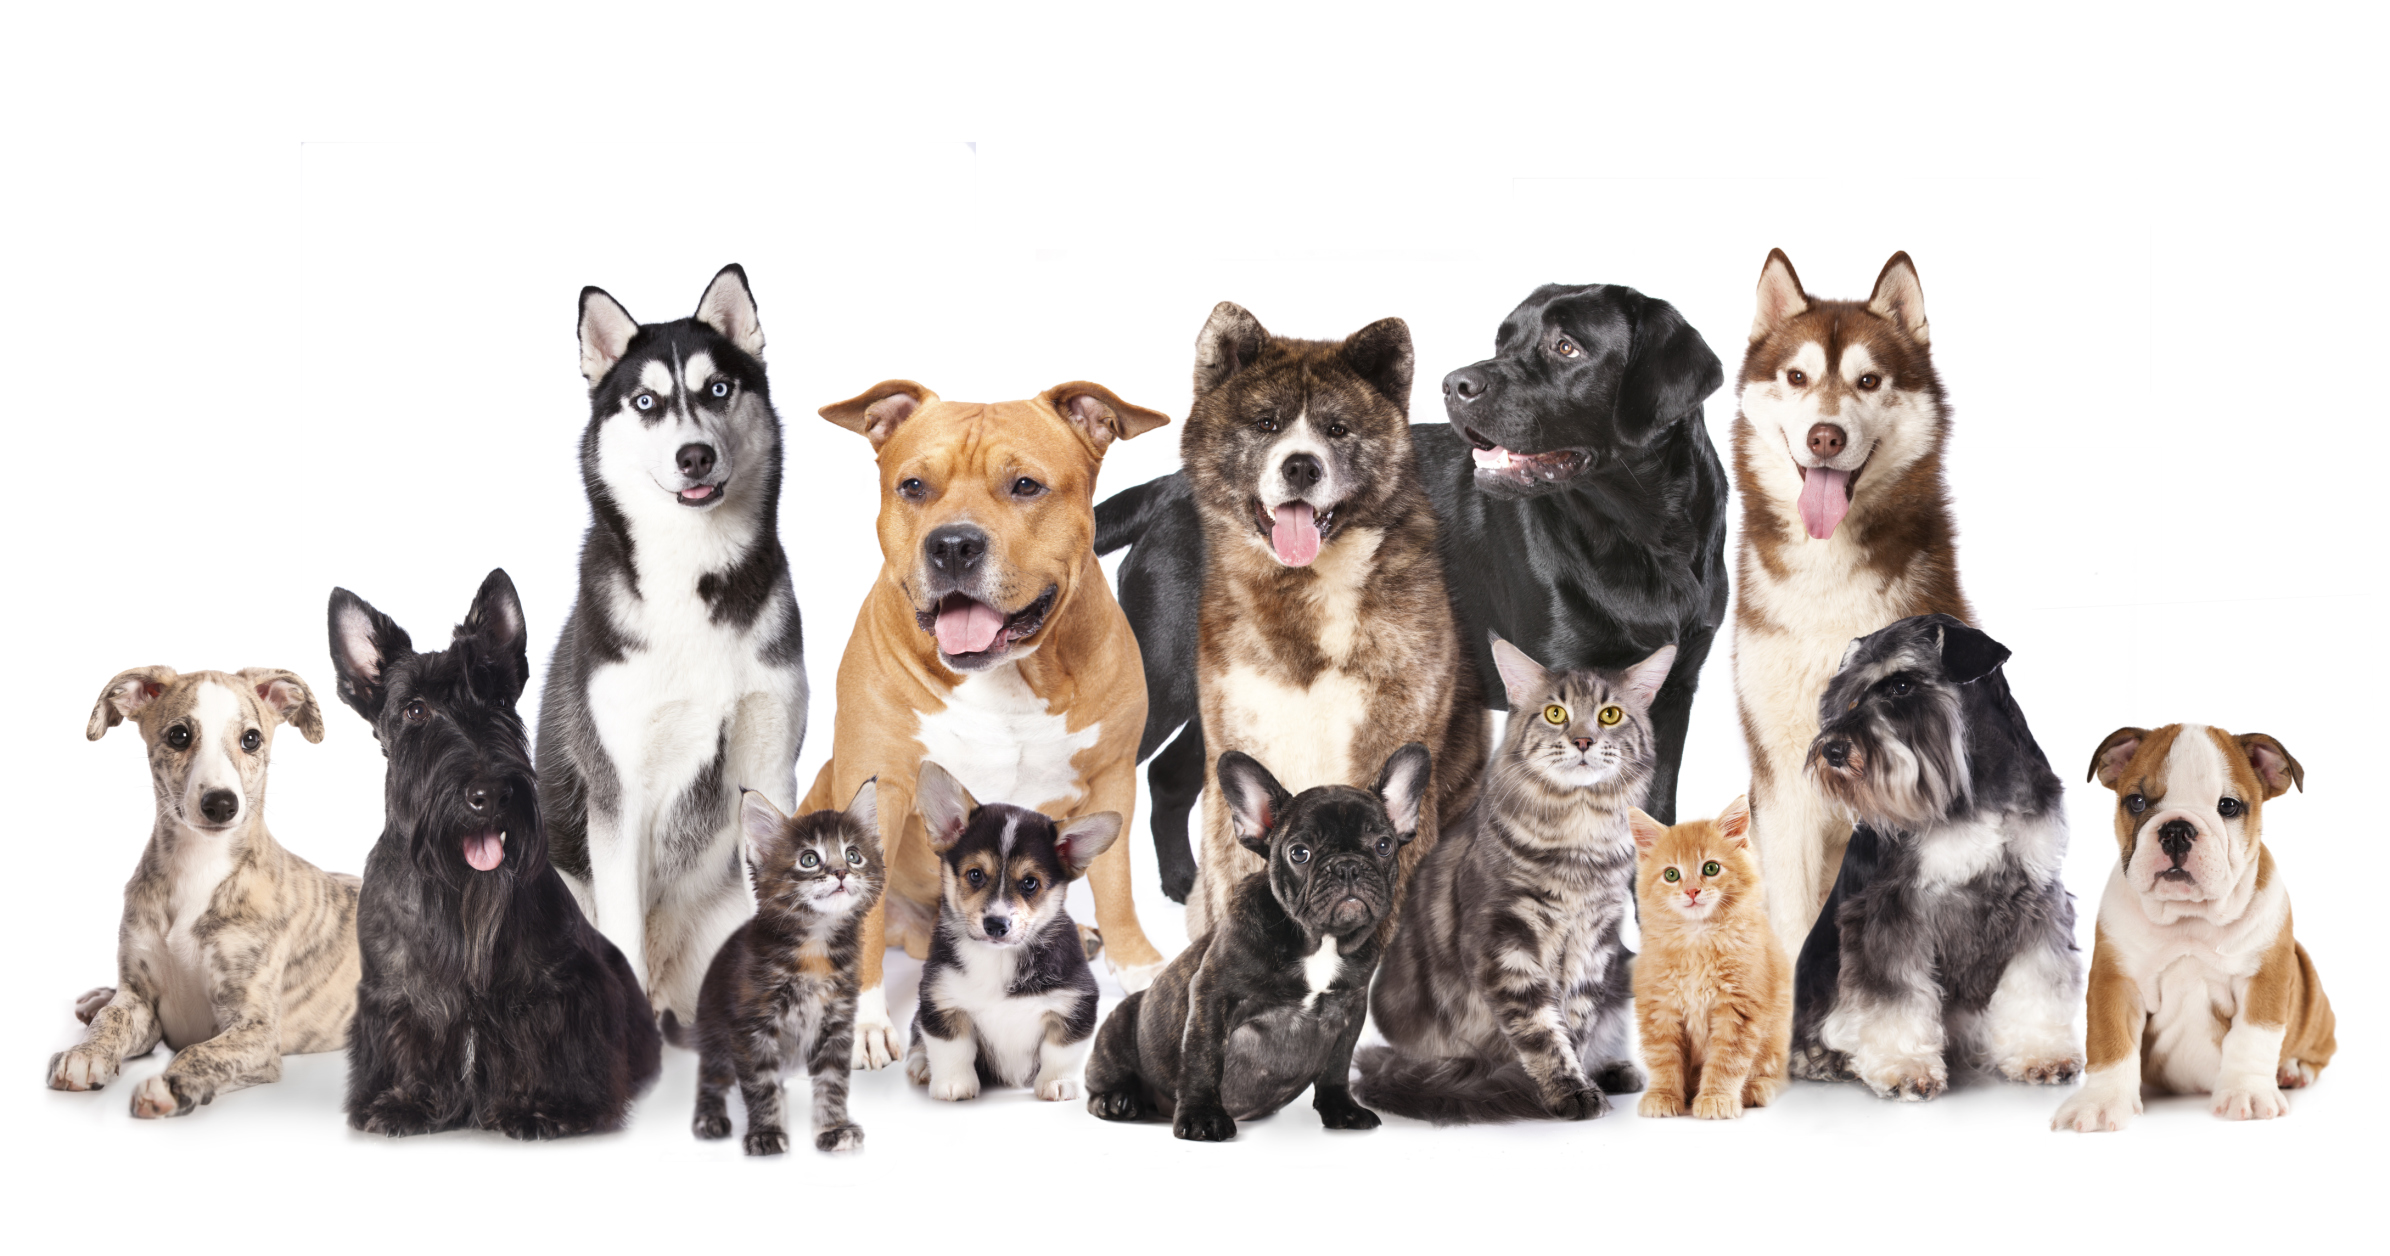 Wiggle Waggle Tails - Cats and dogs